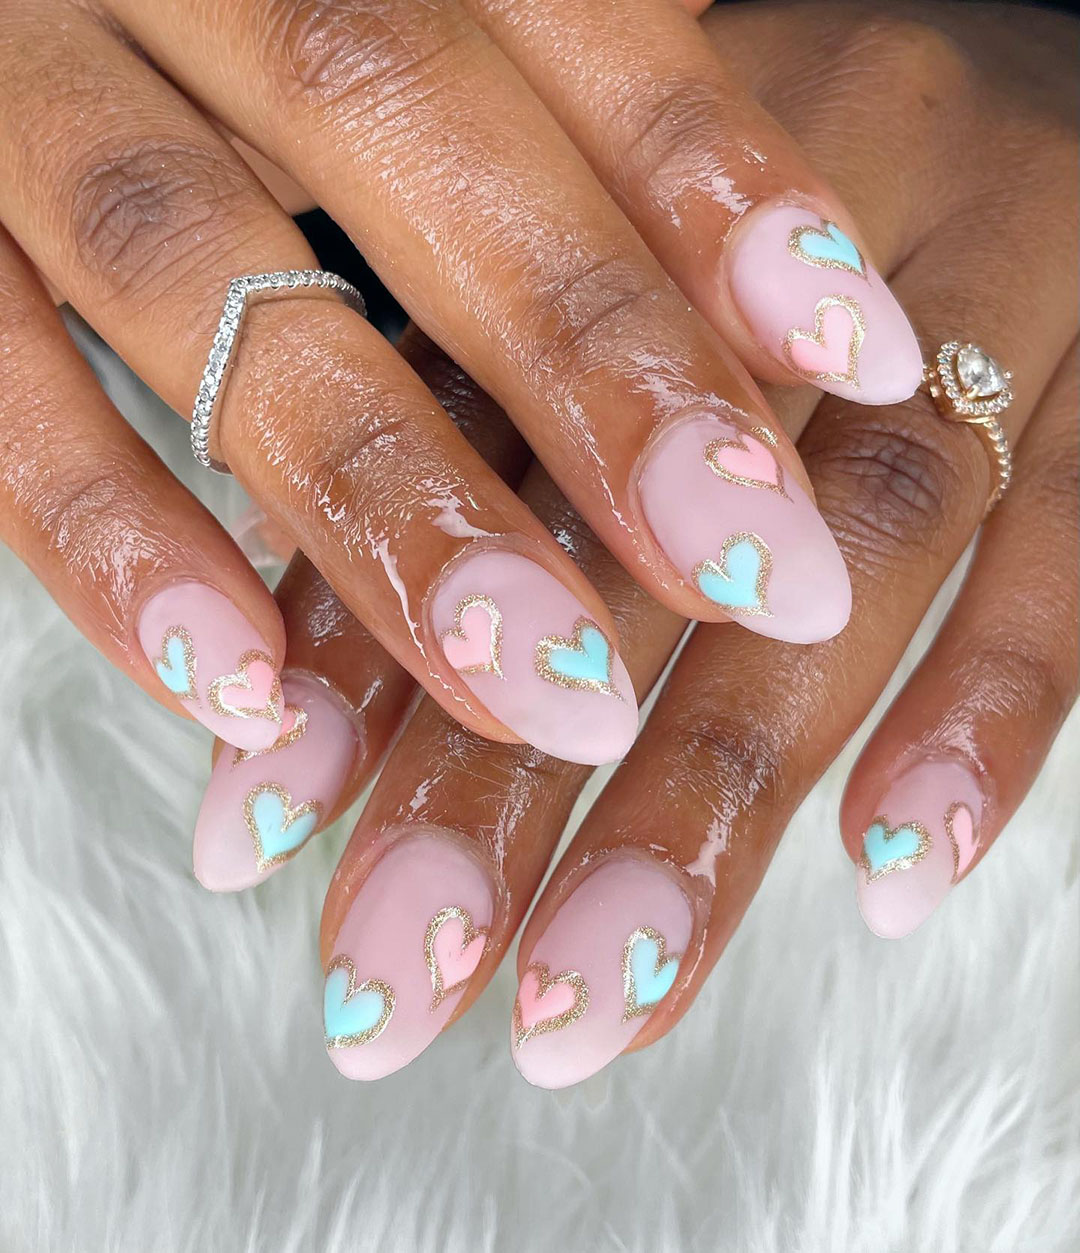 nail art with sweetheart candy design.